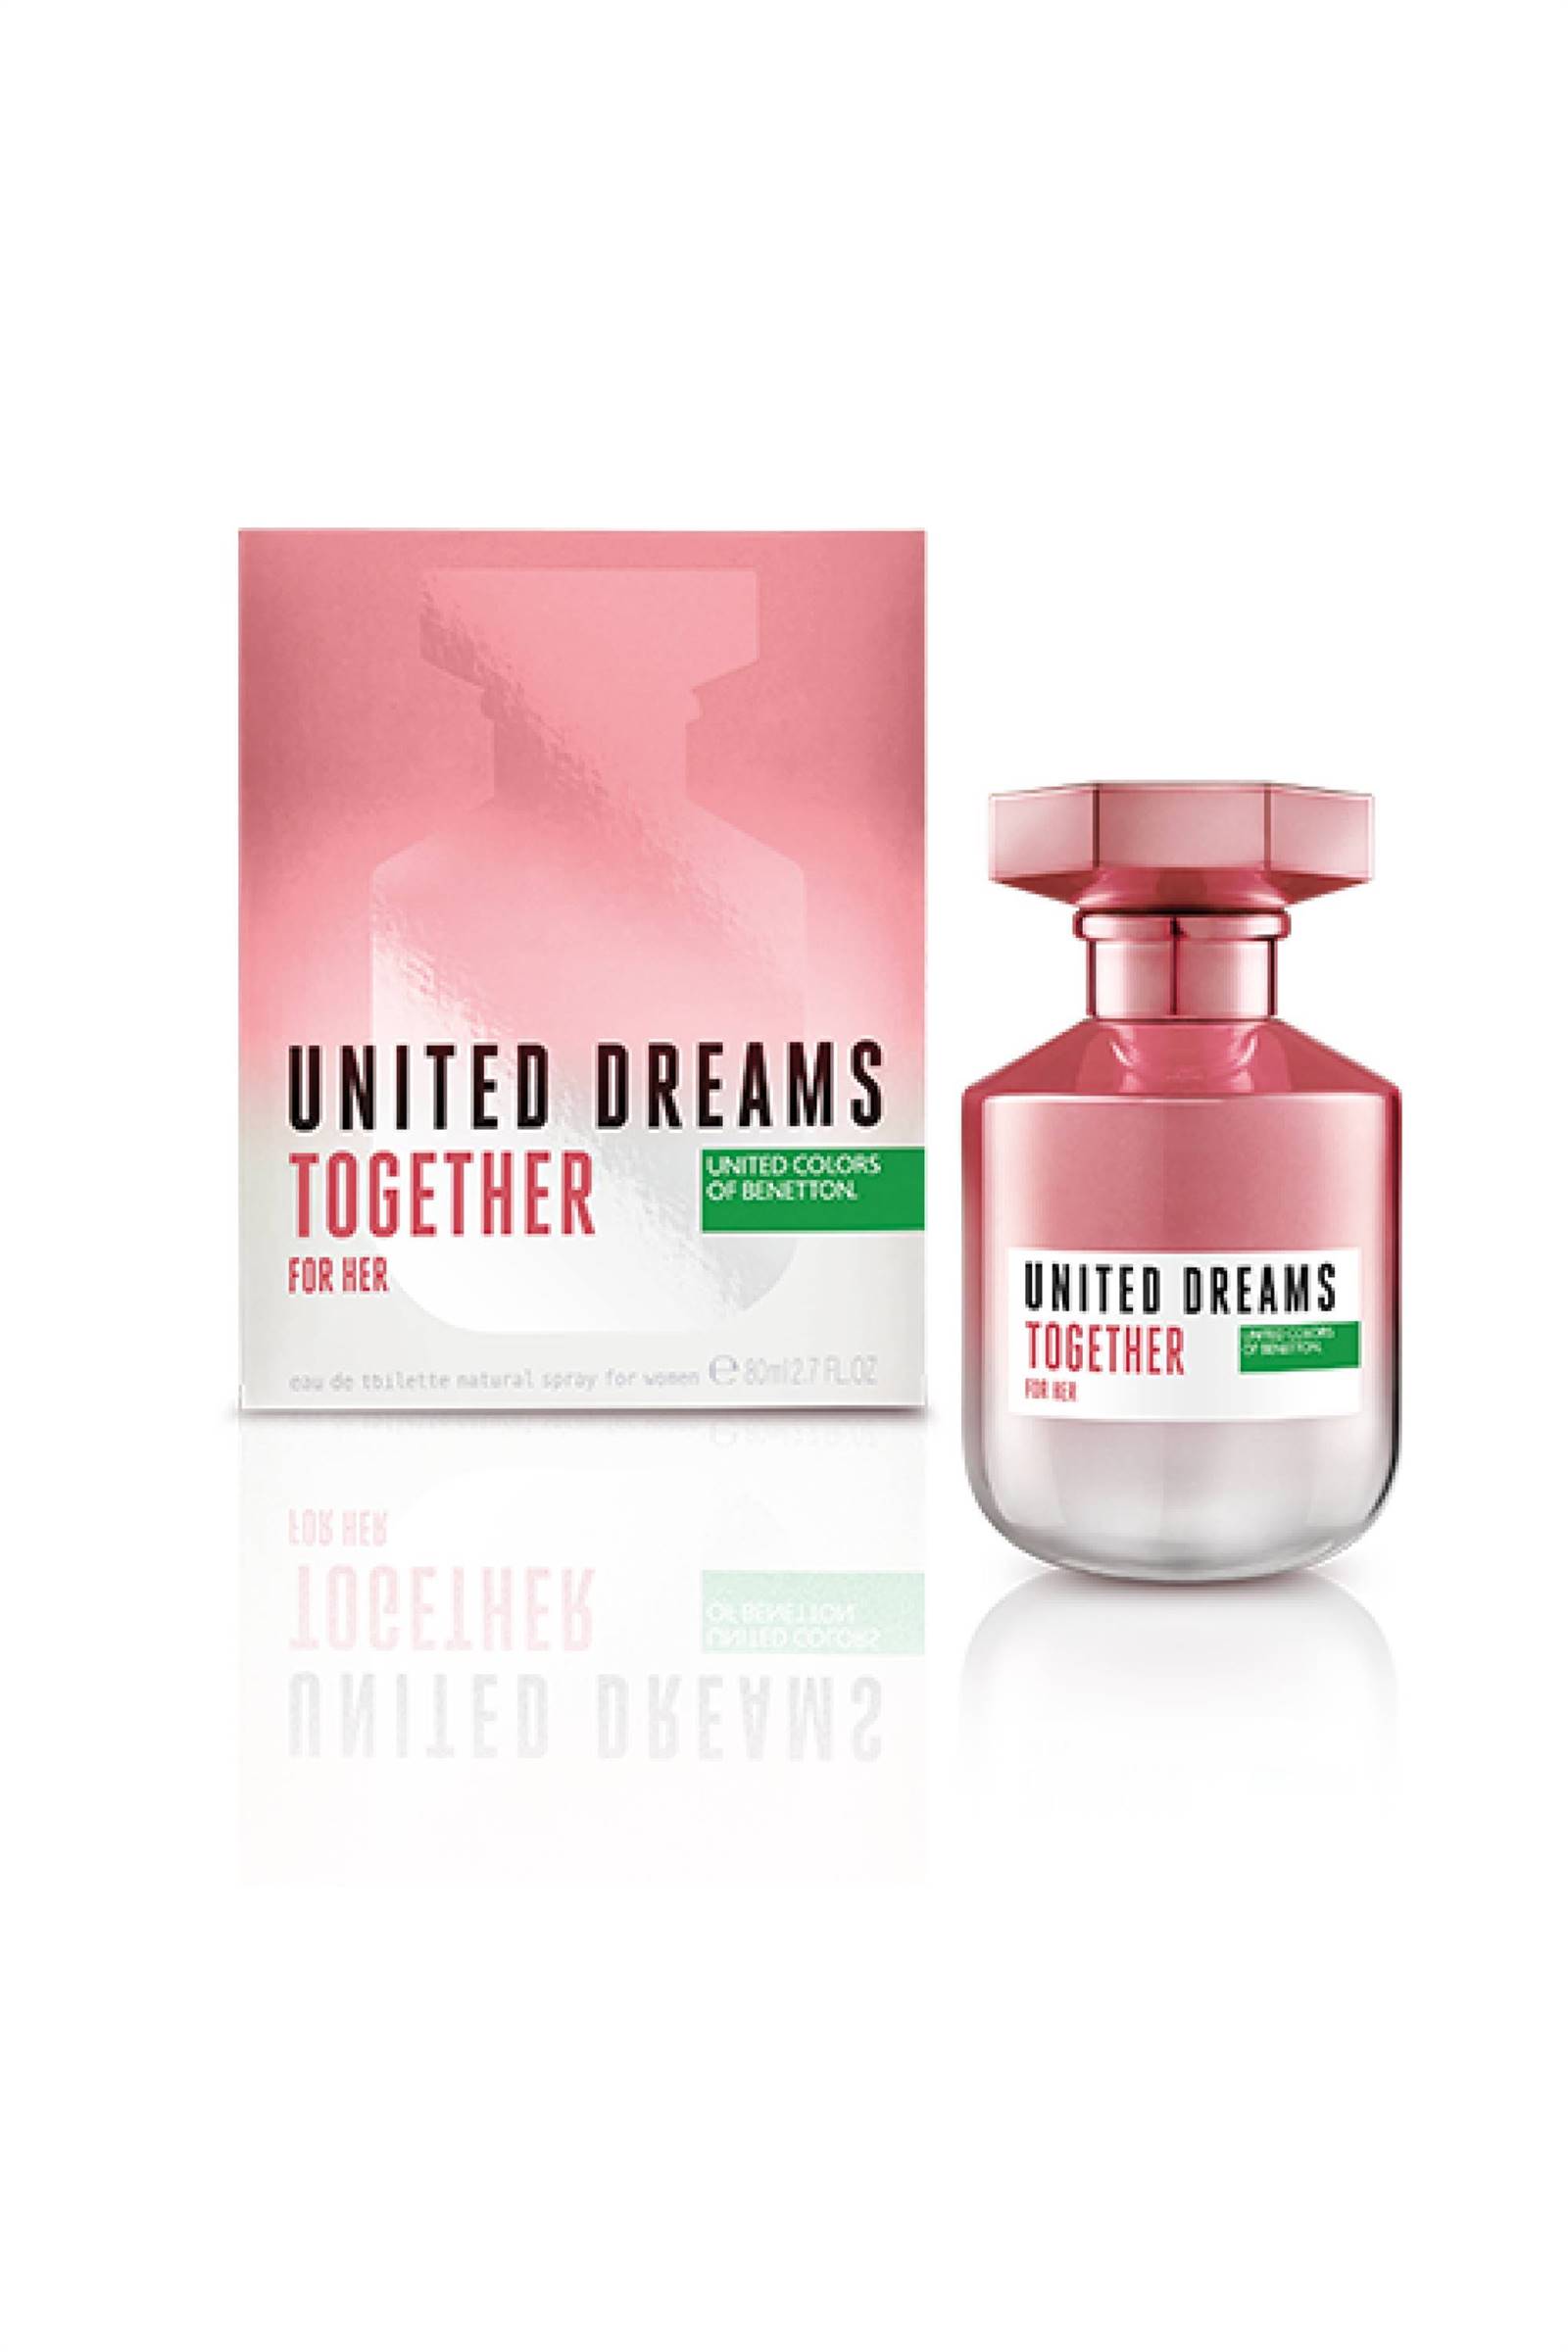 United dreams together